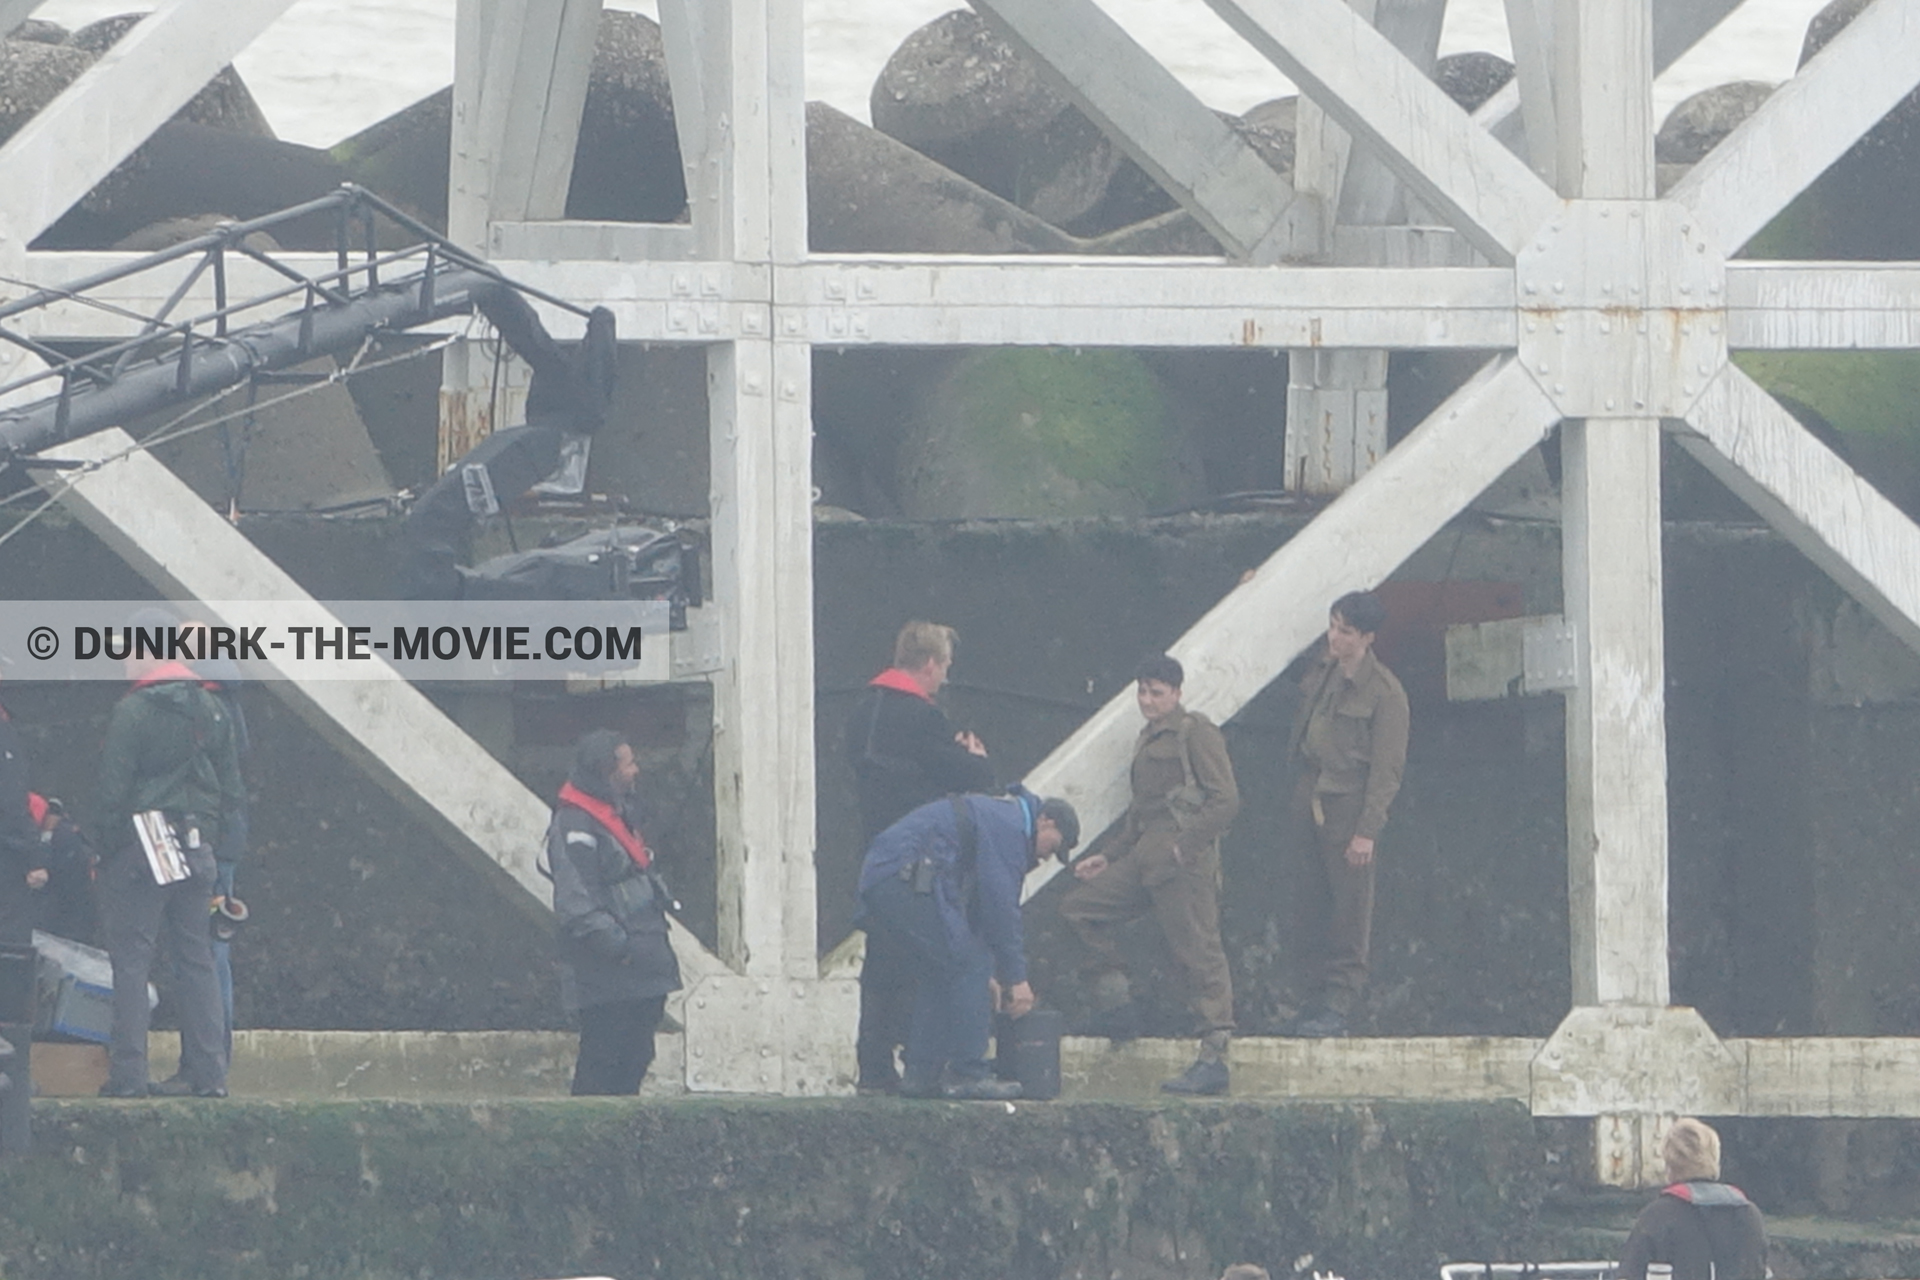 Picture with actor, EST pier, technical team,  from behind the scene of the Dunkirk movie by Nolan